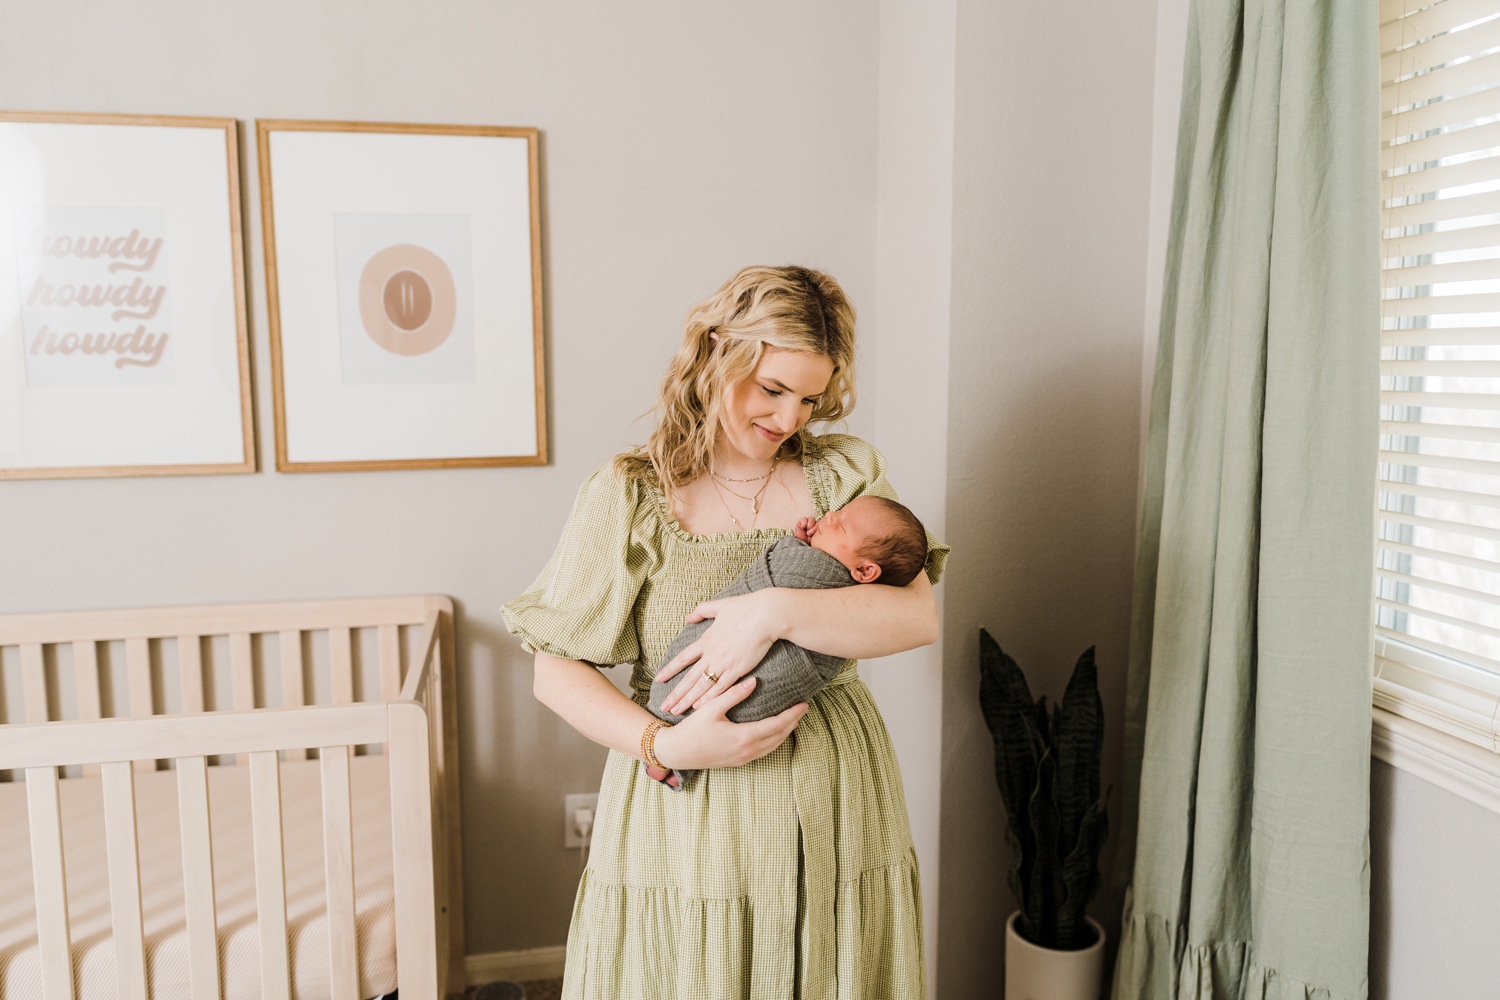 Relaxed In-Home Newborn Session in Neutral Home and Spring Outfits | Dallas Texas Family and Newborn Photographer